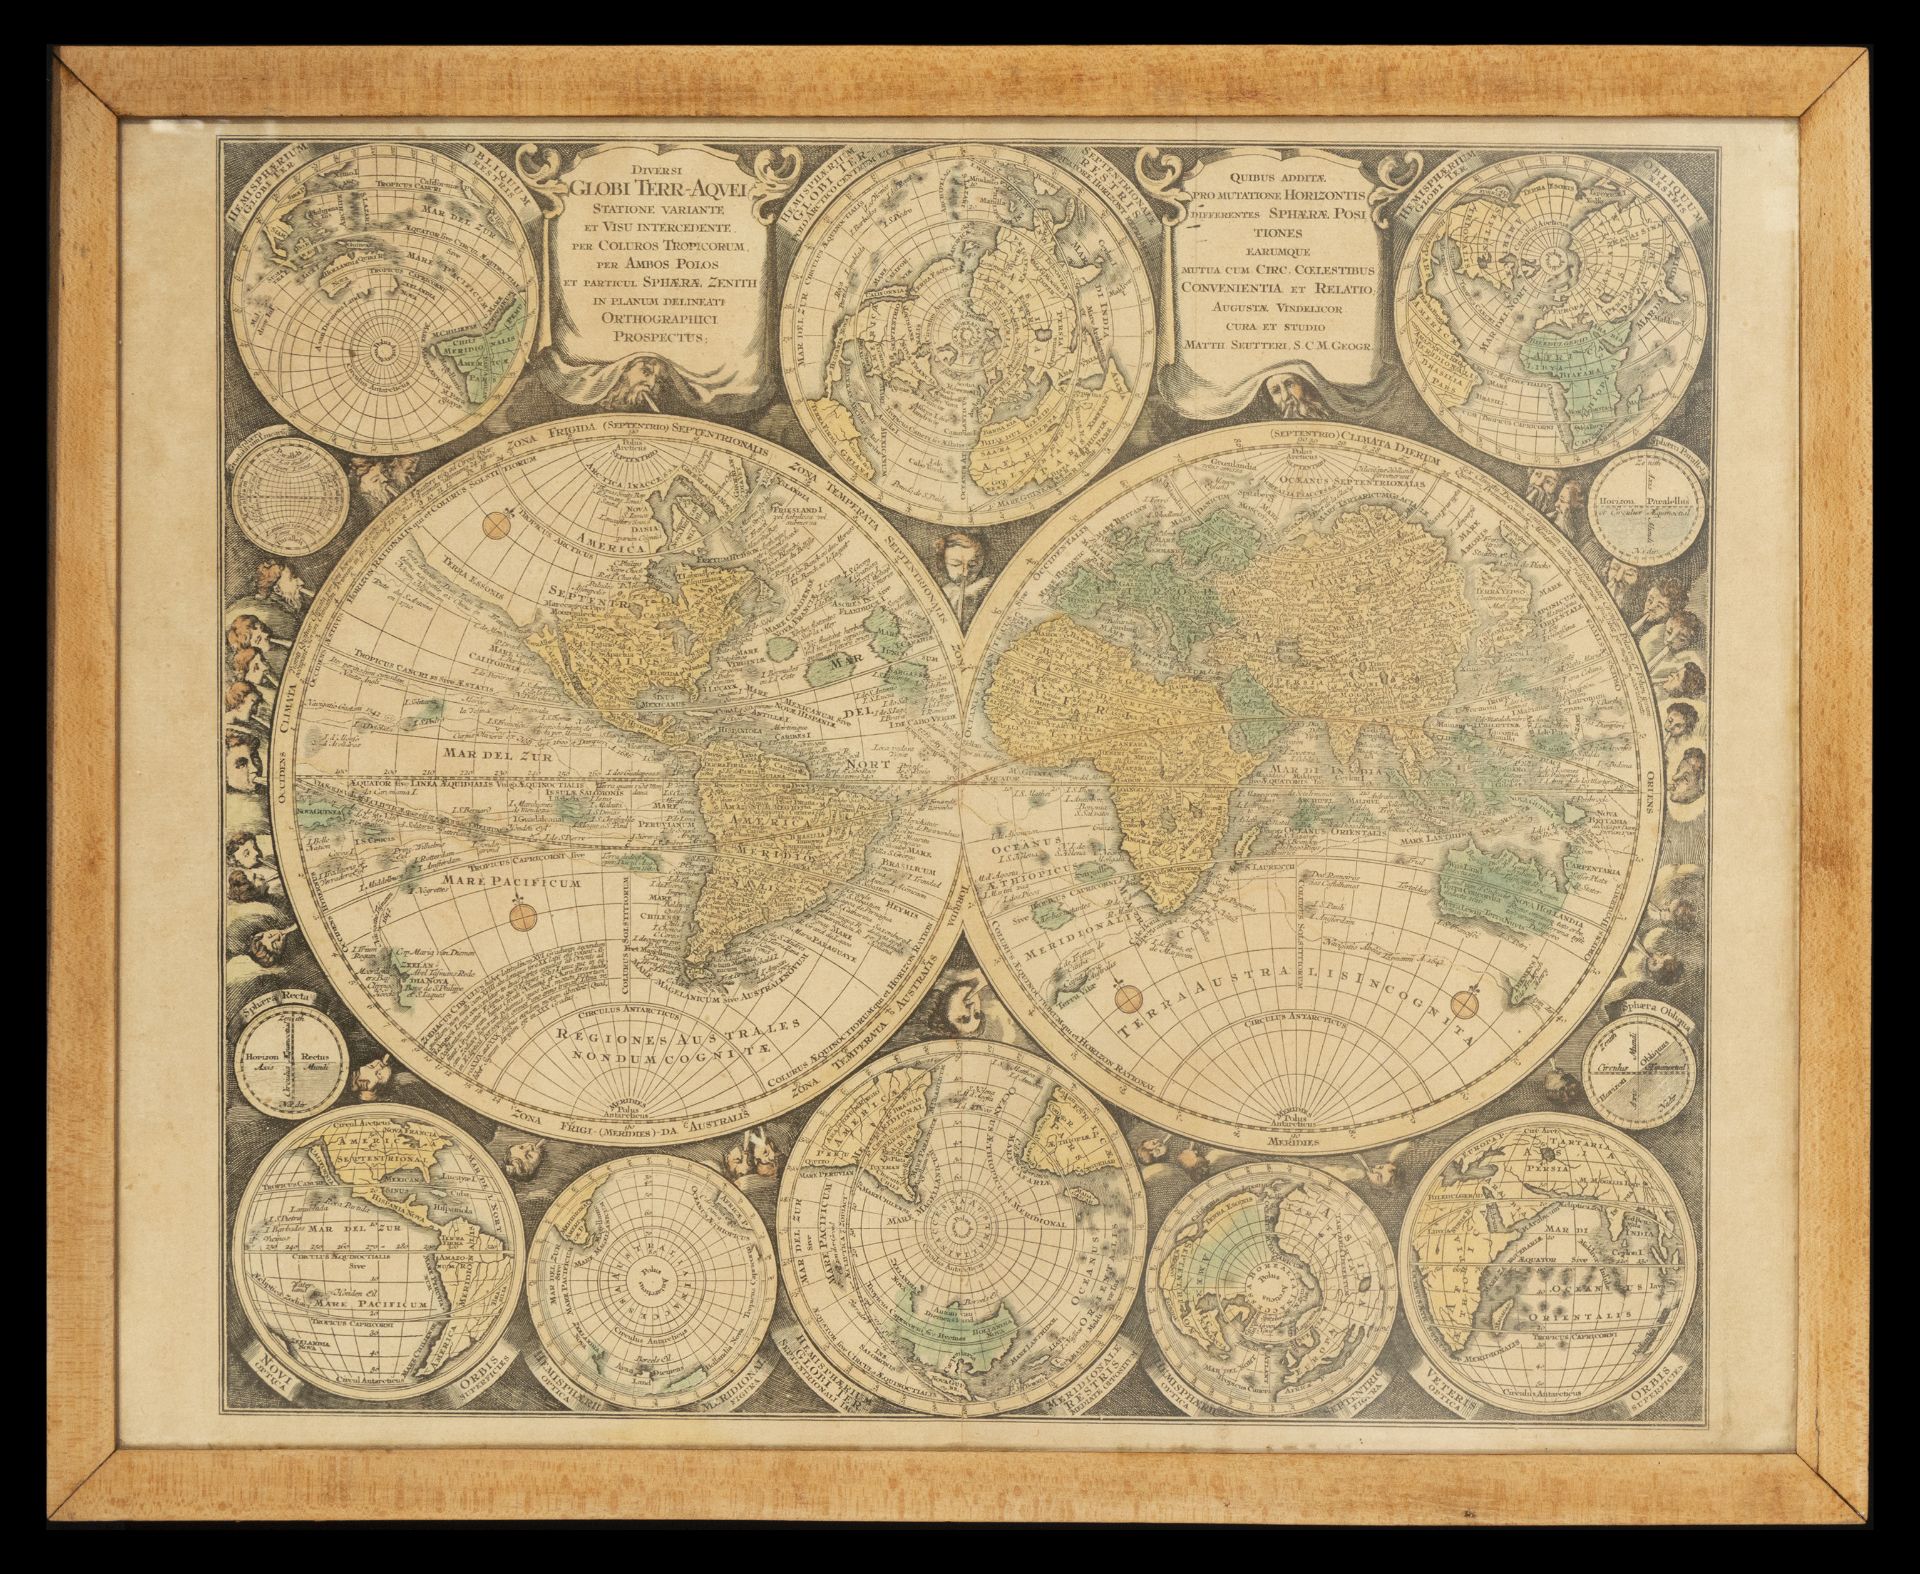 Antique Engraving on paper from the Atlas Mundi from the 18th century